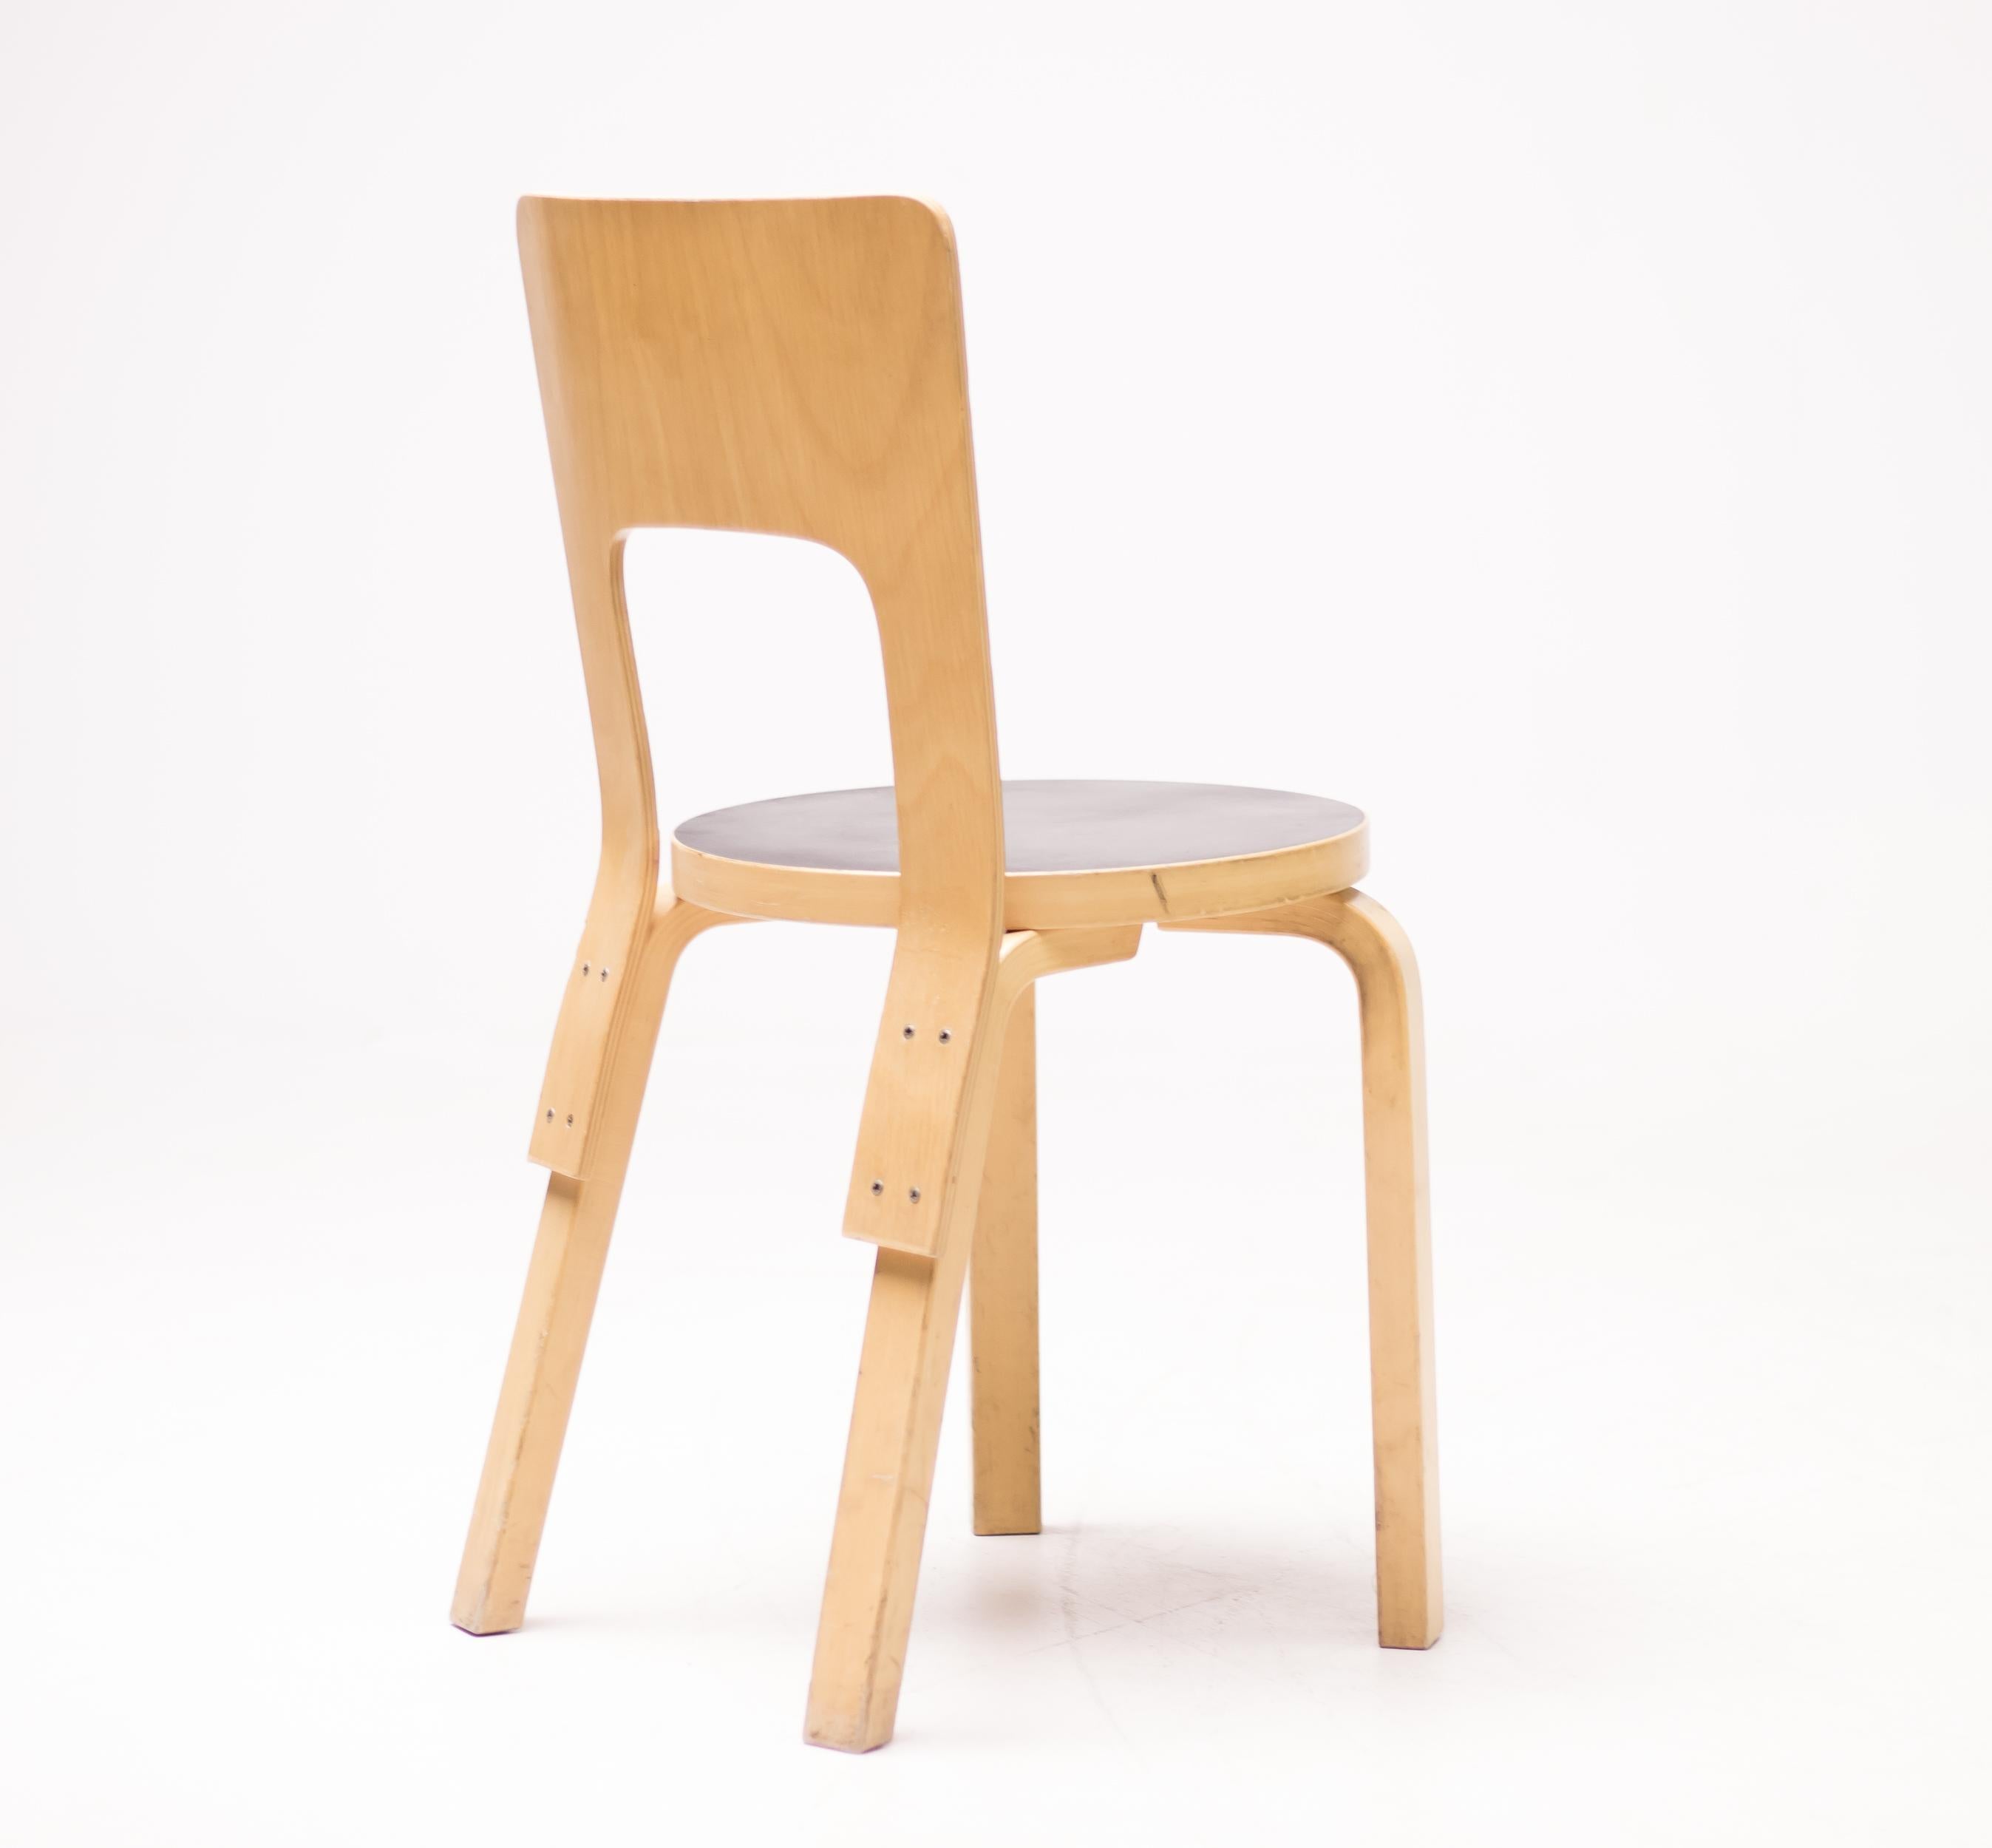 Alvar Aalto model 66 dining chairs manufactured by Artek, Finland.
Birch plywood with black linoleum seat. 
Made in 1980-2007, some marked with Artek label.
Priced individually, circa 45 pieces available.